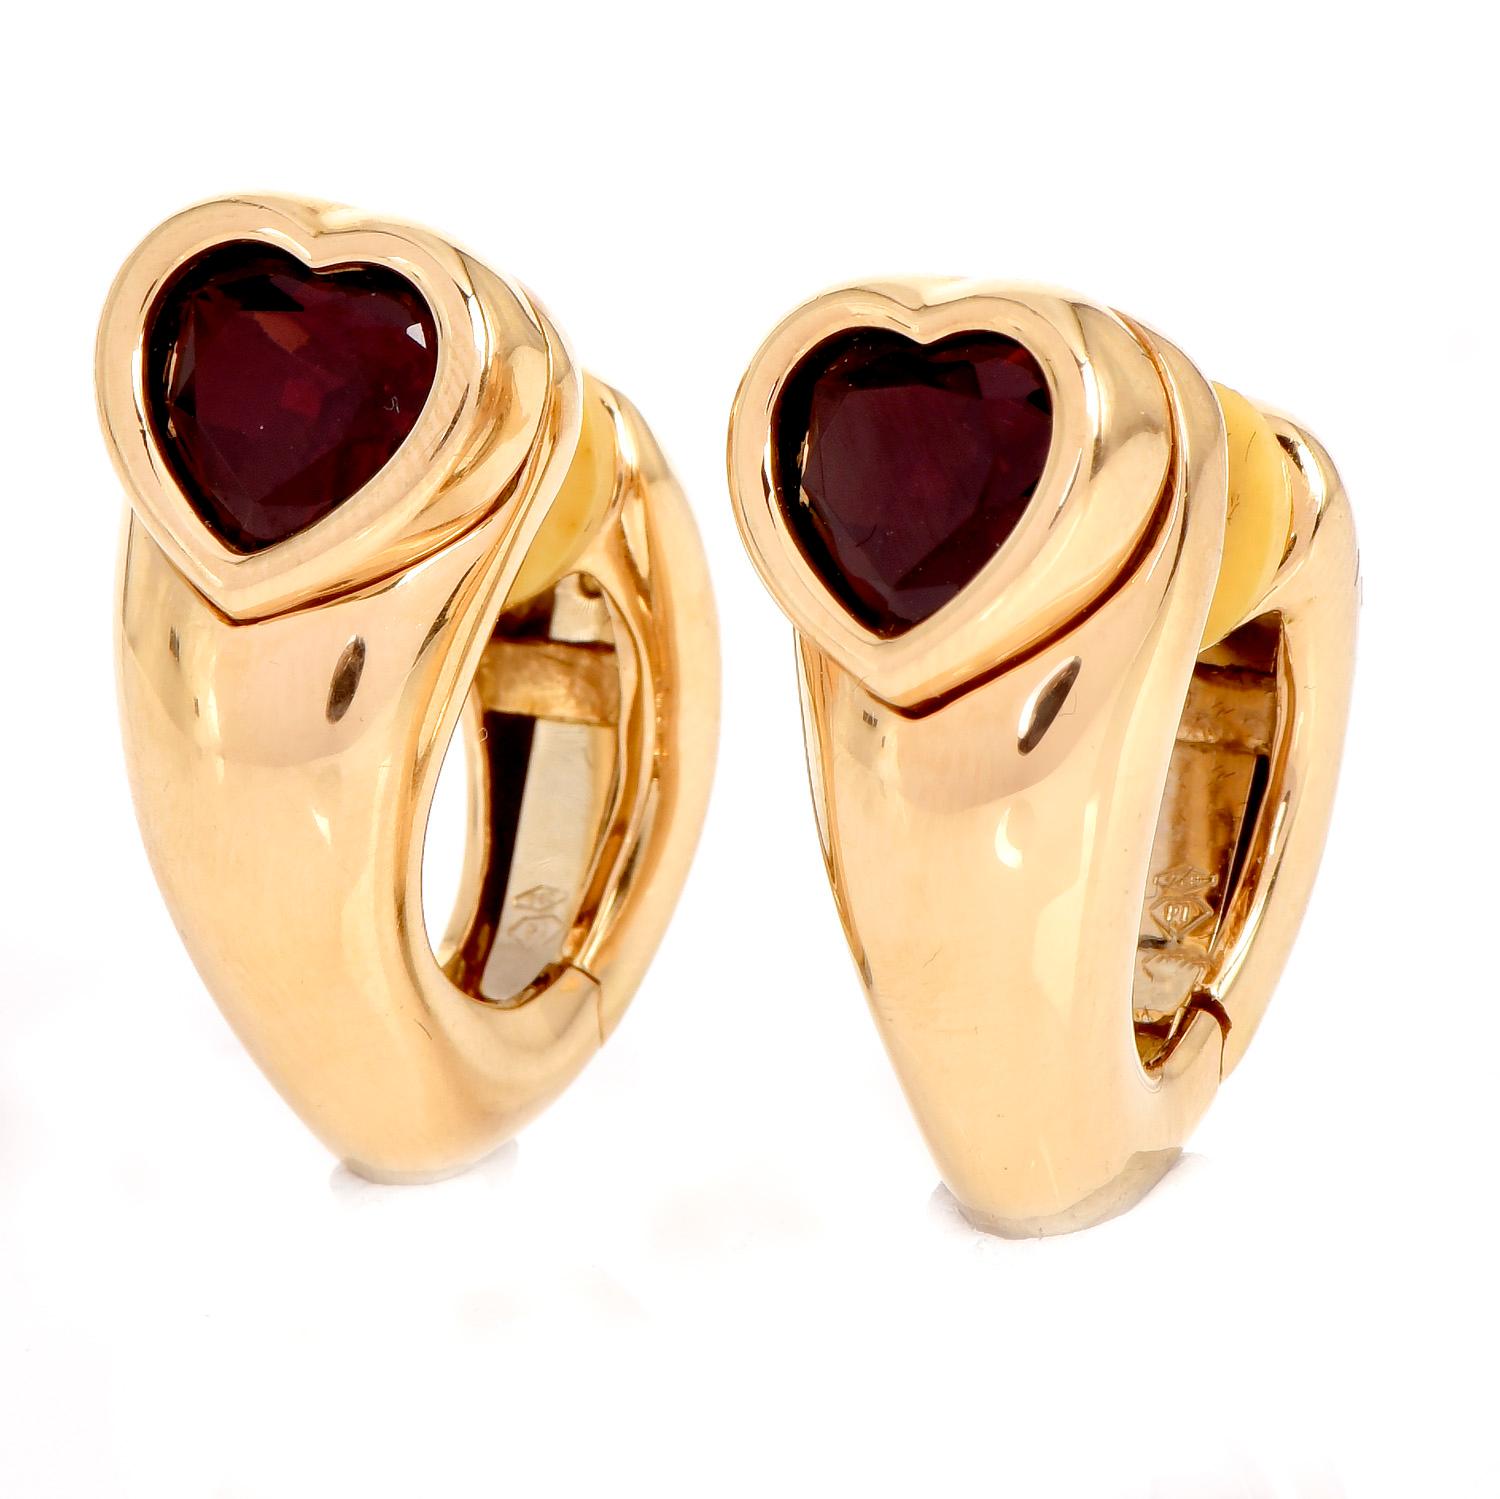 A contrast between High Polished Gold & Deep Color Red, are these exquisite Piaget earrings.

These collectible vintage Piaget Crafted in Luxurious 18K yellow gold, these earrings

measure approx. 25 mm x 11 mm, 

Romantically presenting (2) Heart